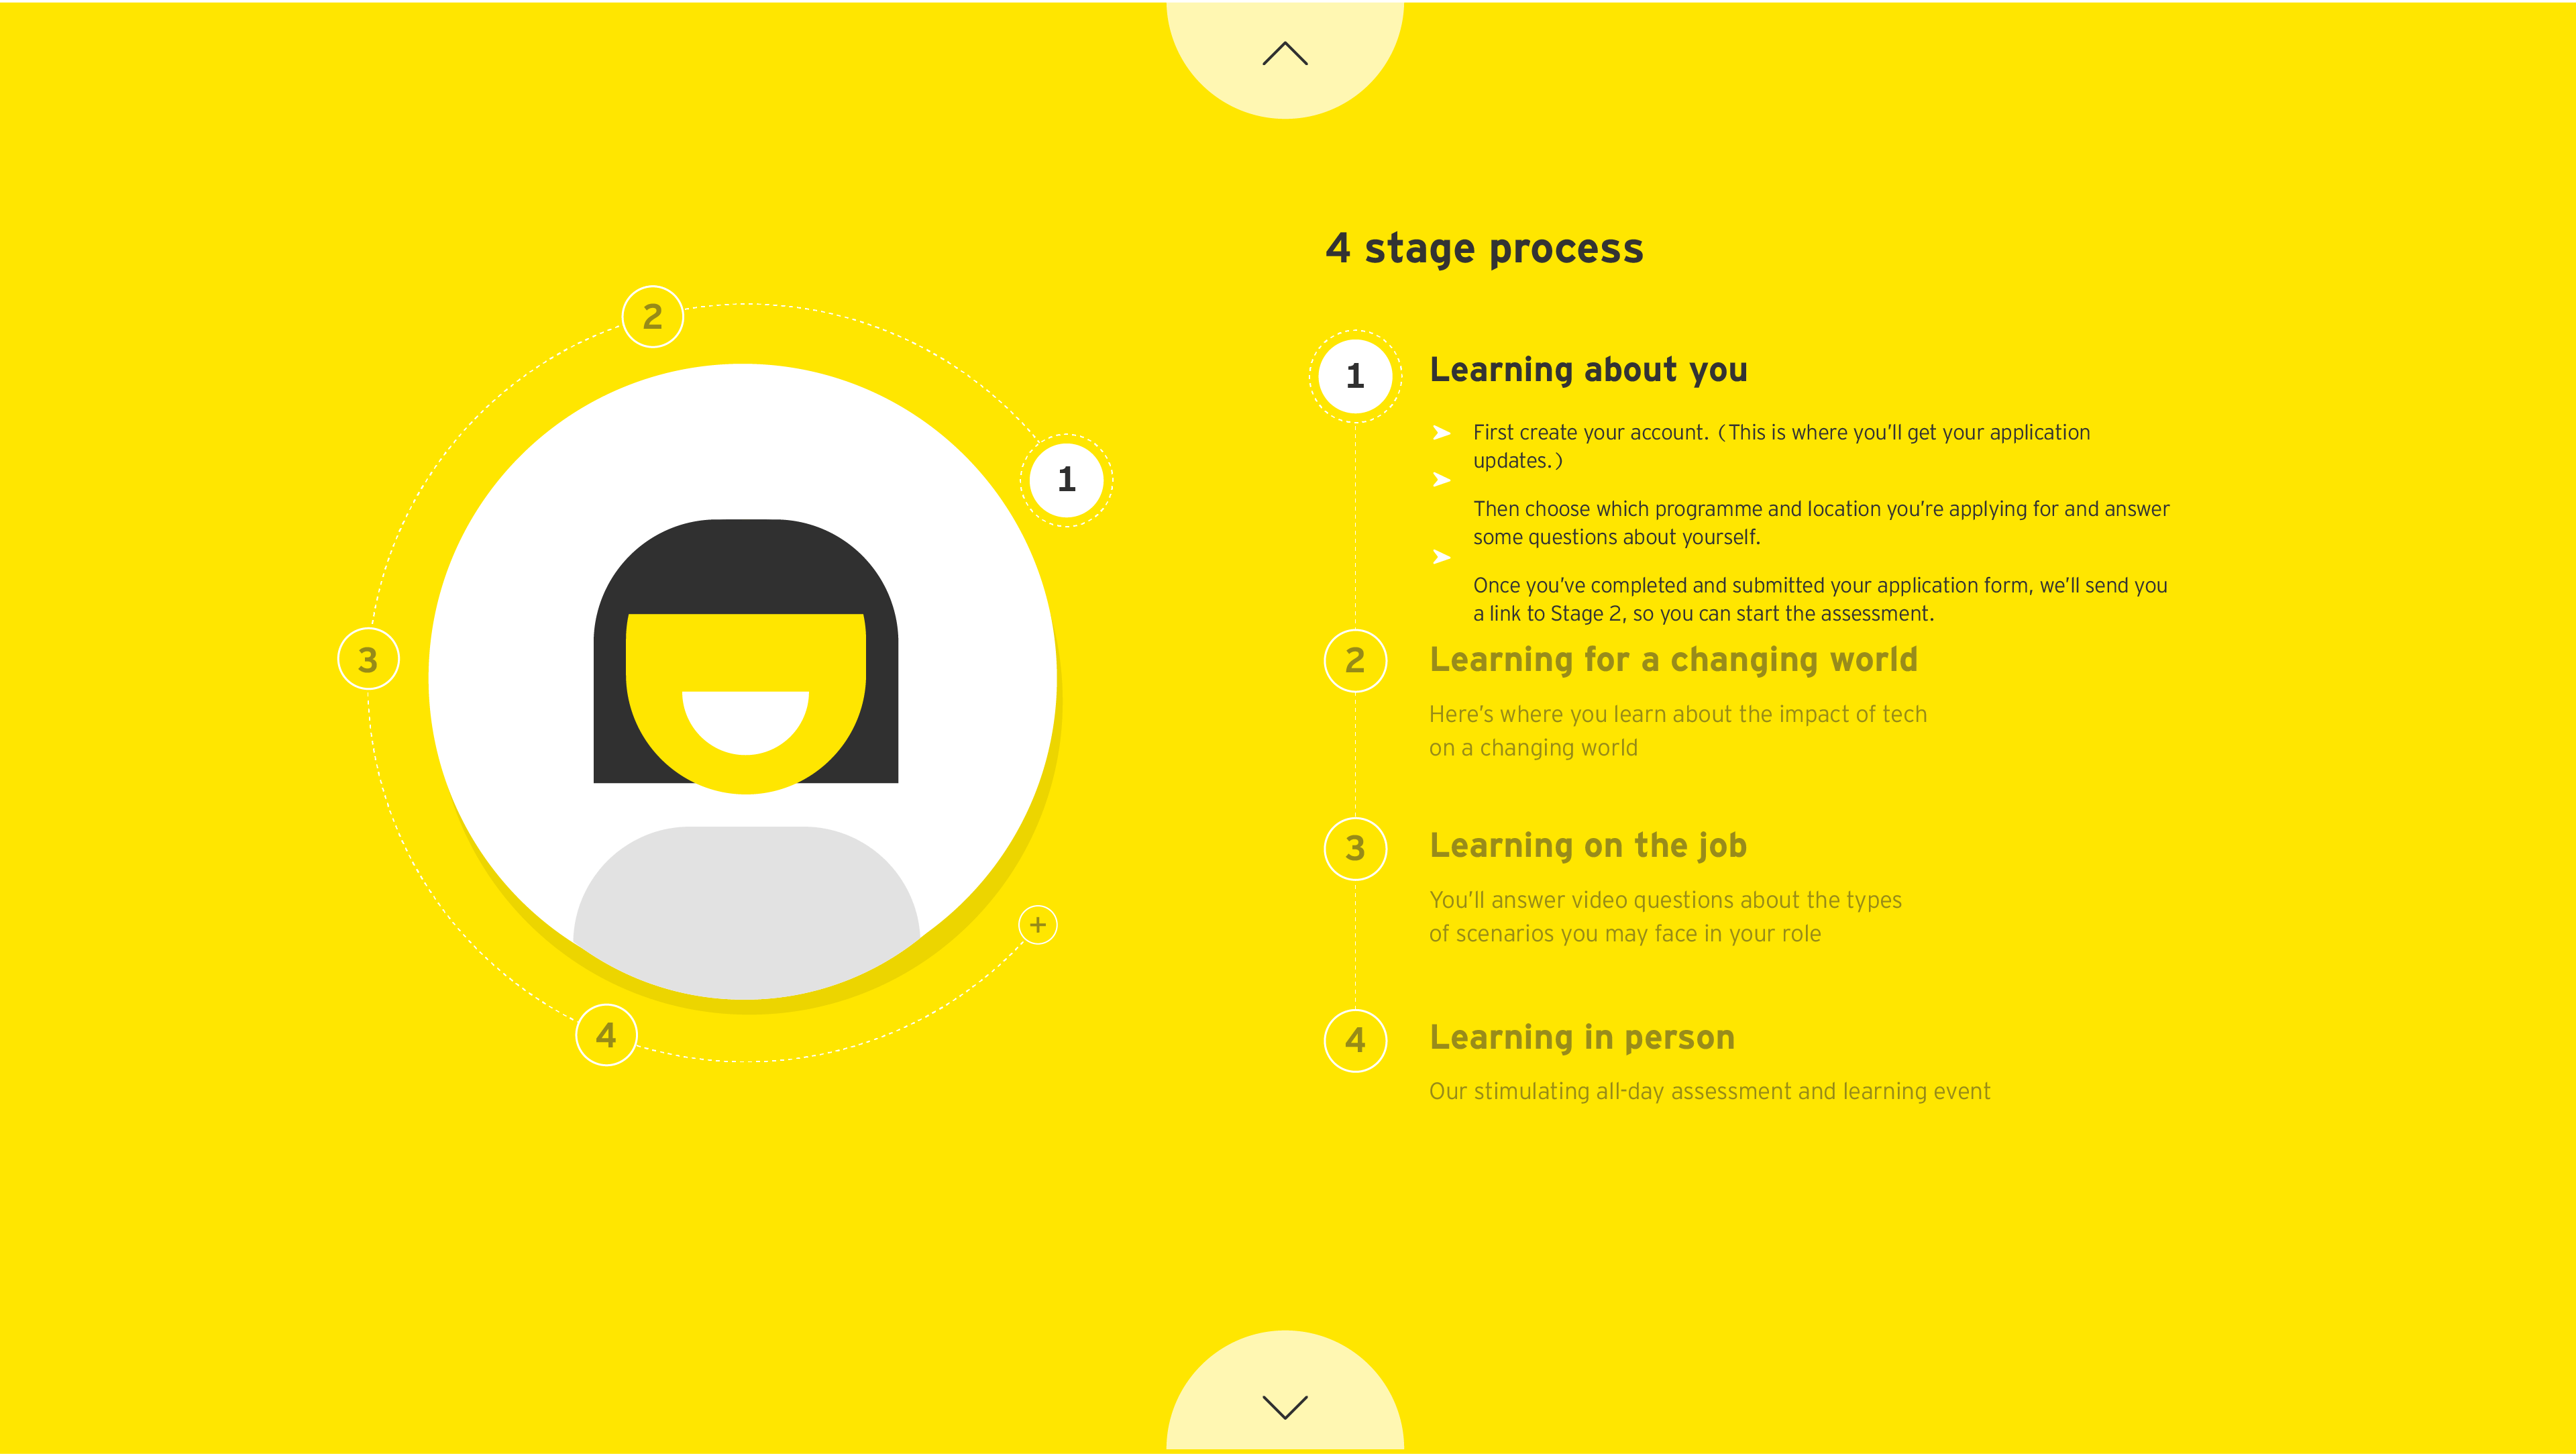 Anwser Yellow Person Logo - EY - UK Careers Application process at EY